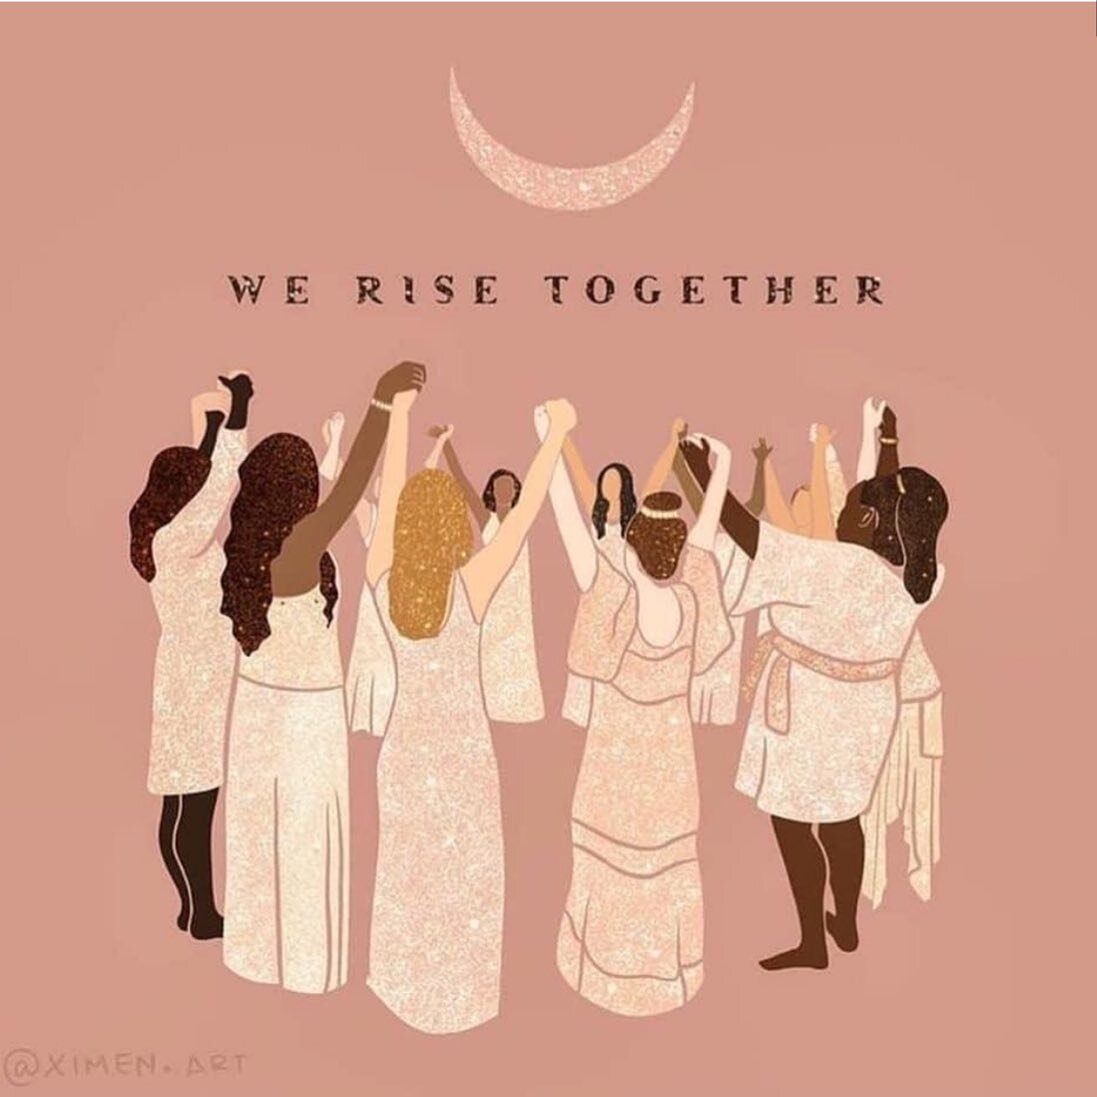 To all who identify as women, today is your day and together we rise. Happy International Women&rsquo;s Day! artwork @ximen.art